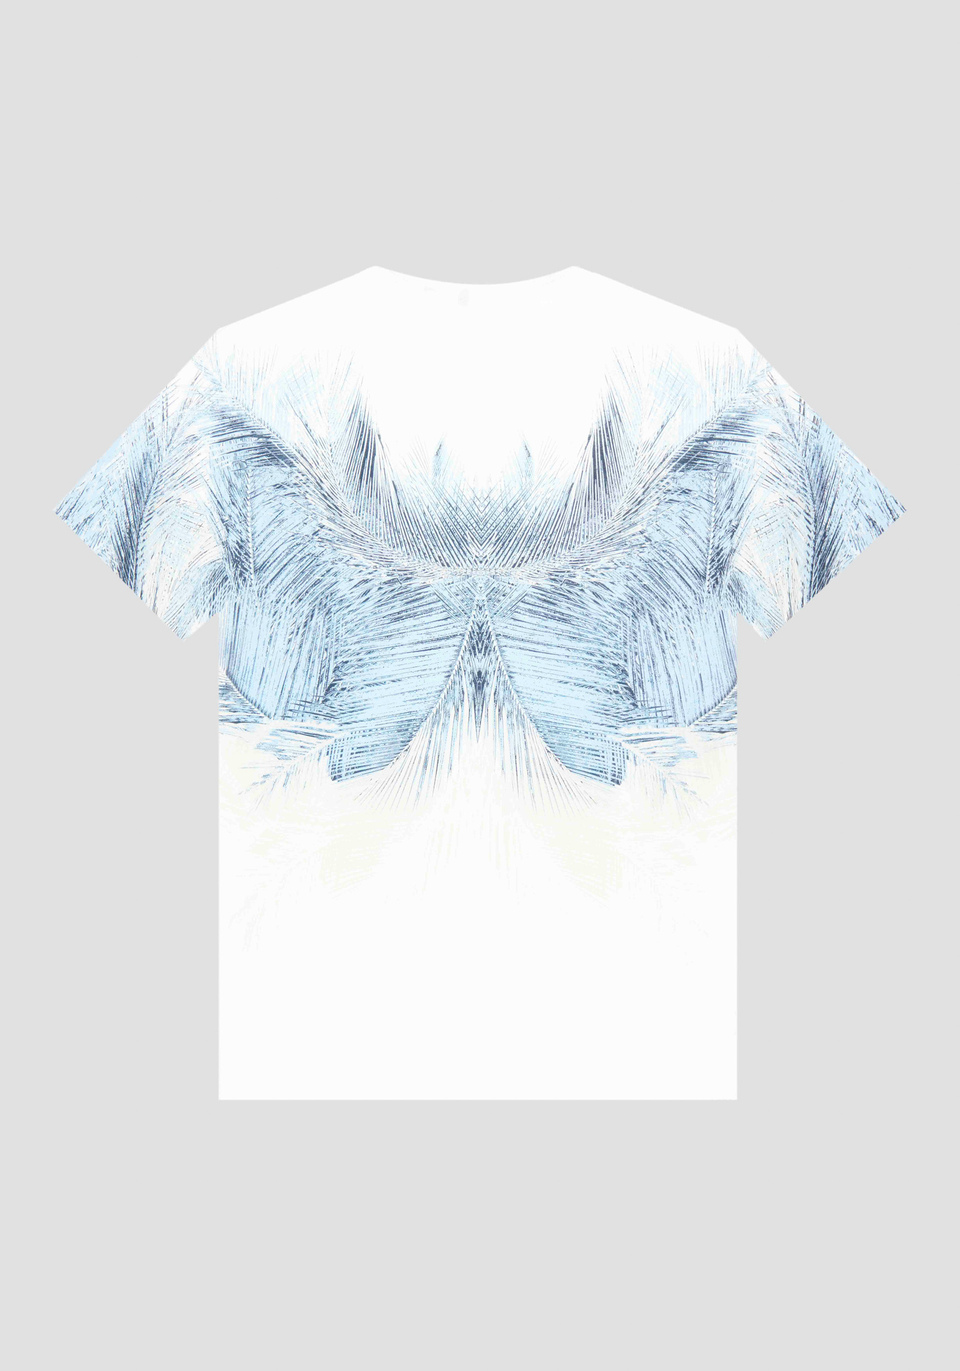 COTTON REGULAR FIT T-SHIRT WITH WATER PRINT - Antony Morato Online Shop